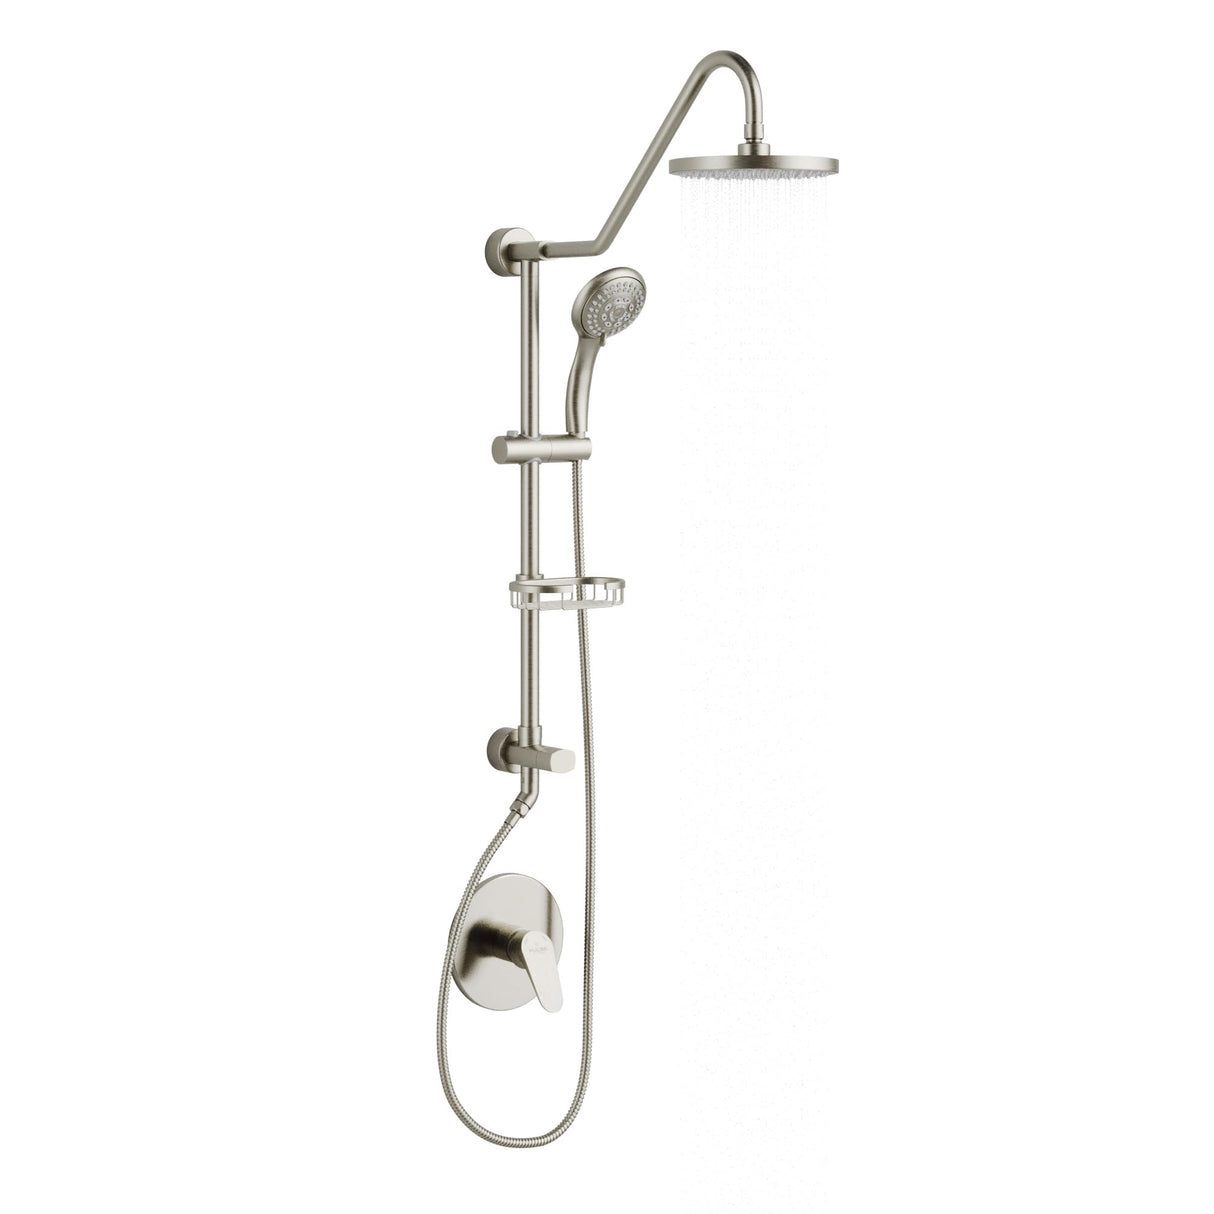 PULSE ShowerSpas 1011-BN-1.8GPM Kauai III Shower System with 8" Rain Showerhead, 5-Function Hand Shower, Adjustable Slide Bar and Soap Dish, Brushed Nickel, 1.8 GPM